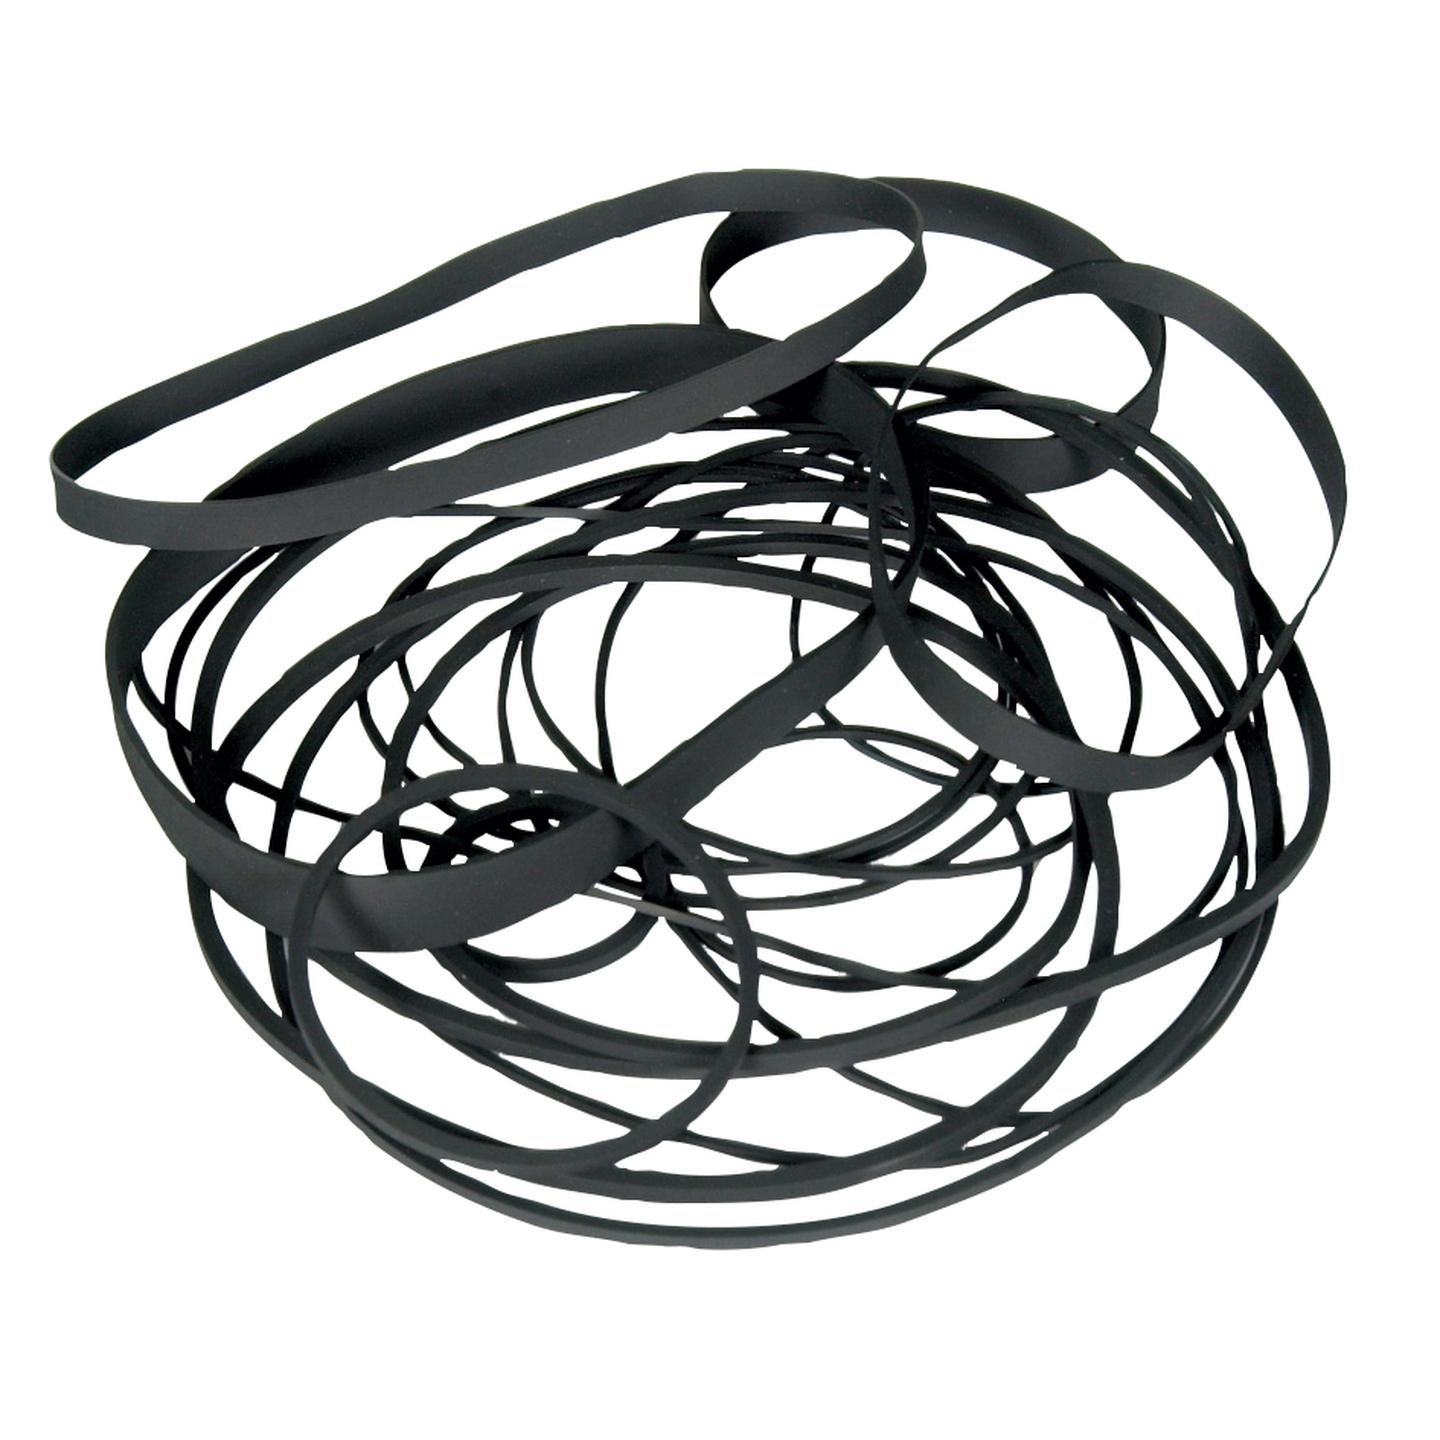 Video Audio and CD Drive Belt Pack - 25 Pieces